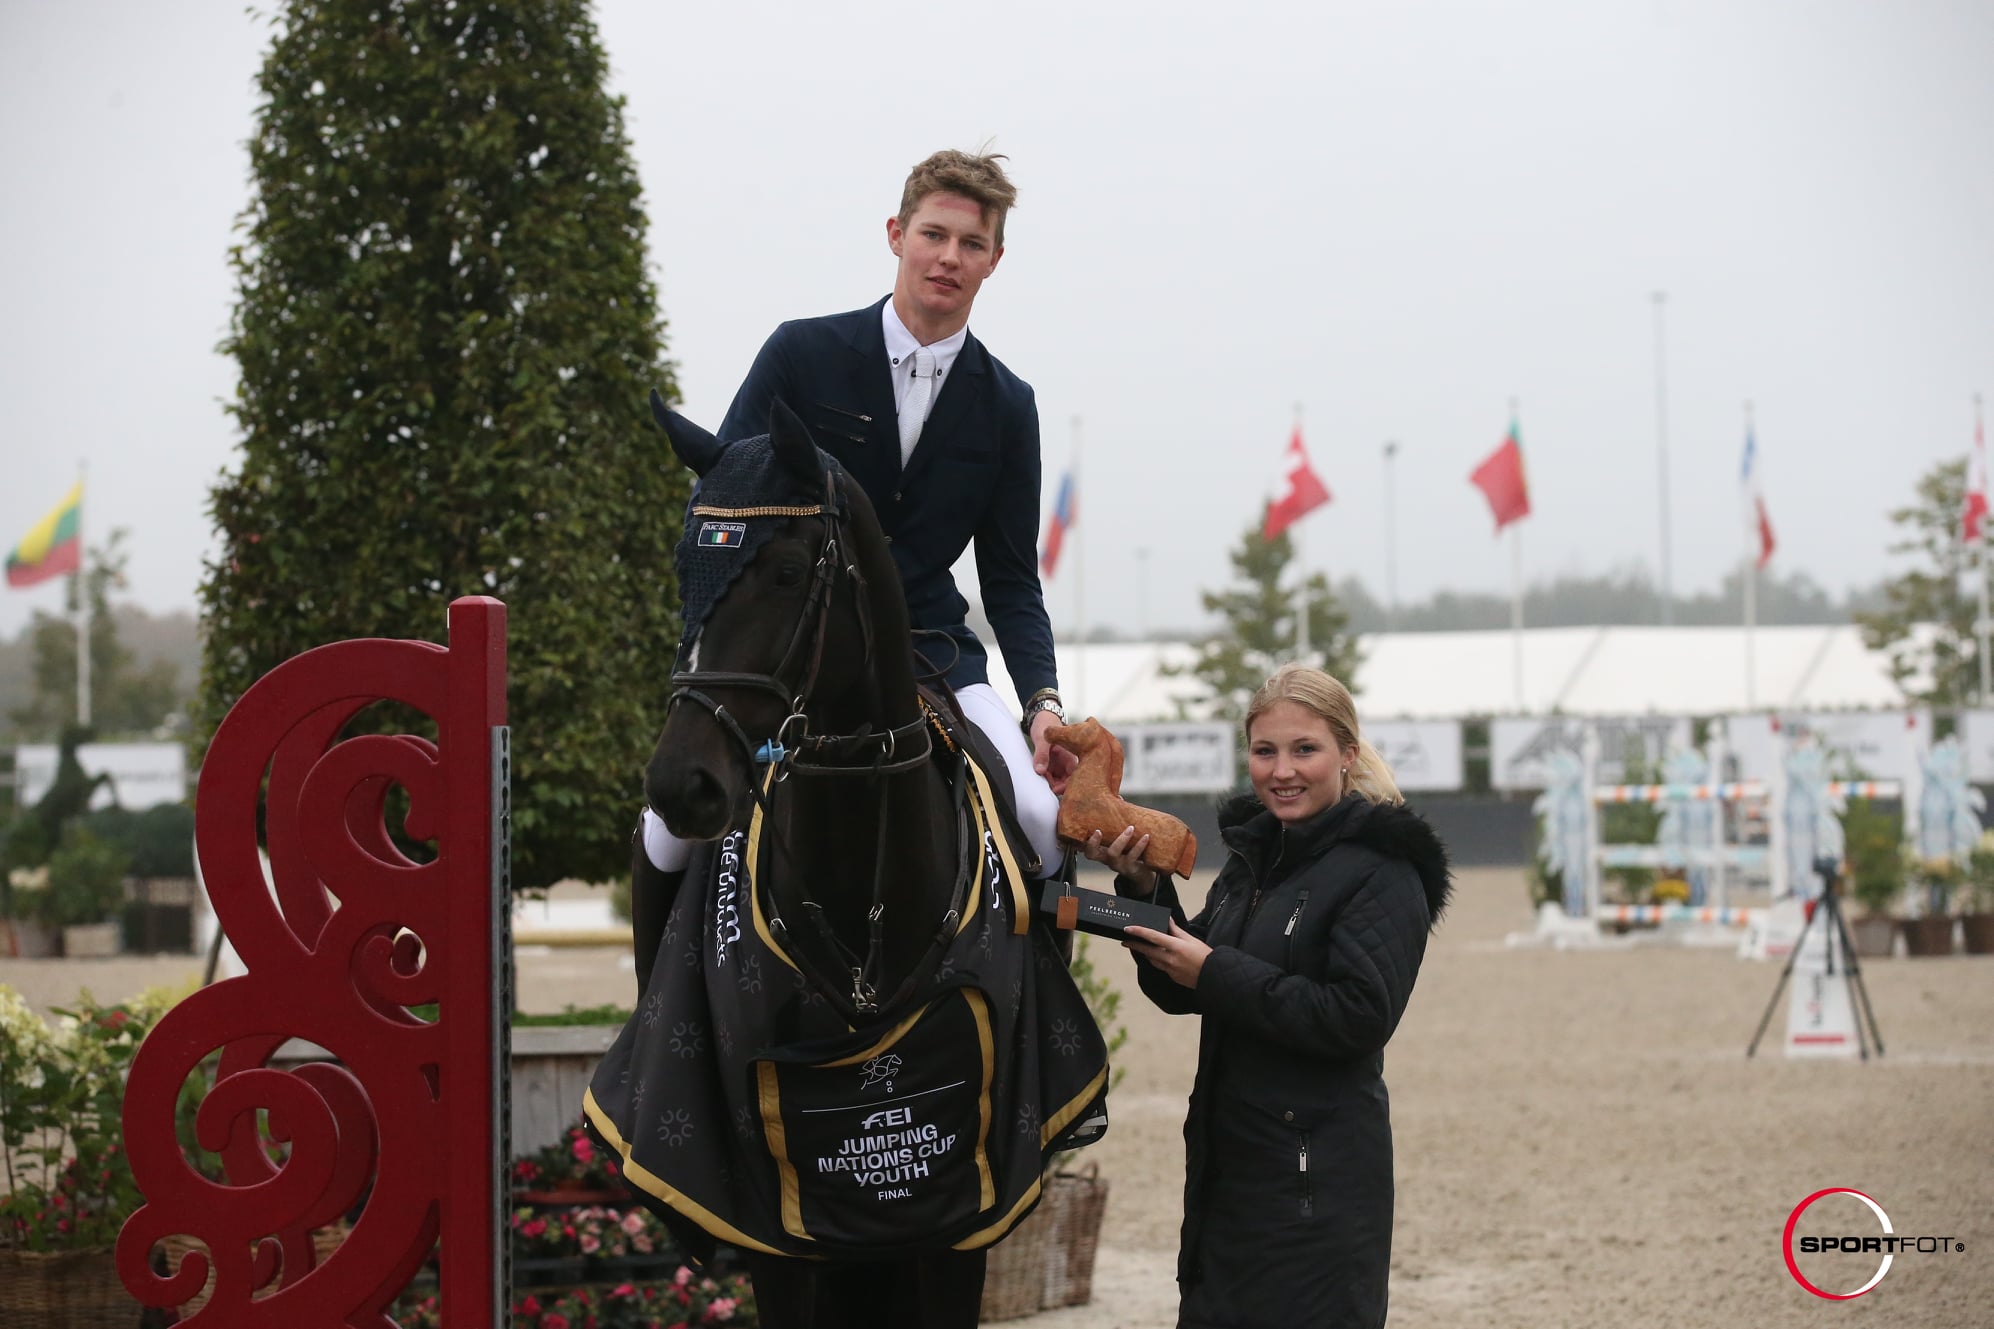 Rhys Williams and Playboy JT Z win Youngster finals in Dublin